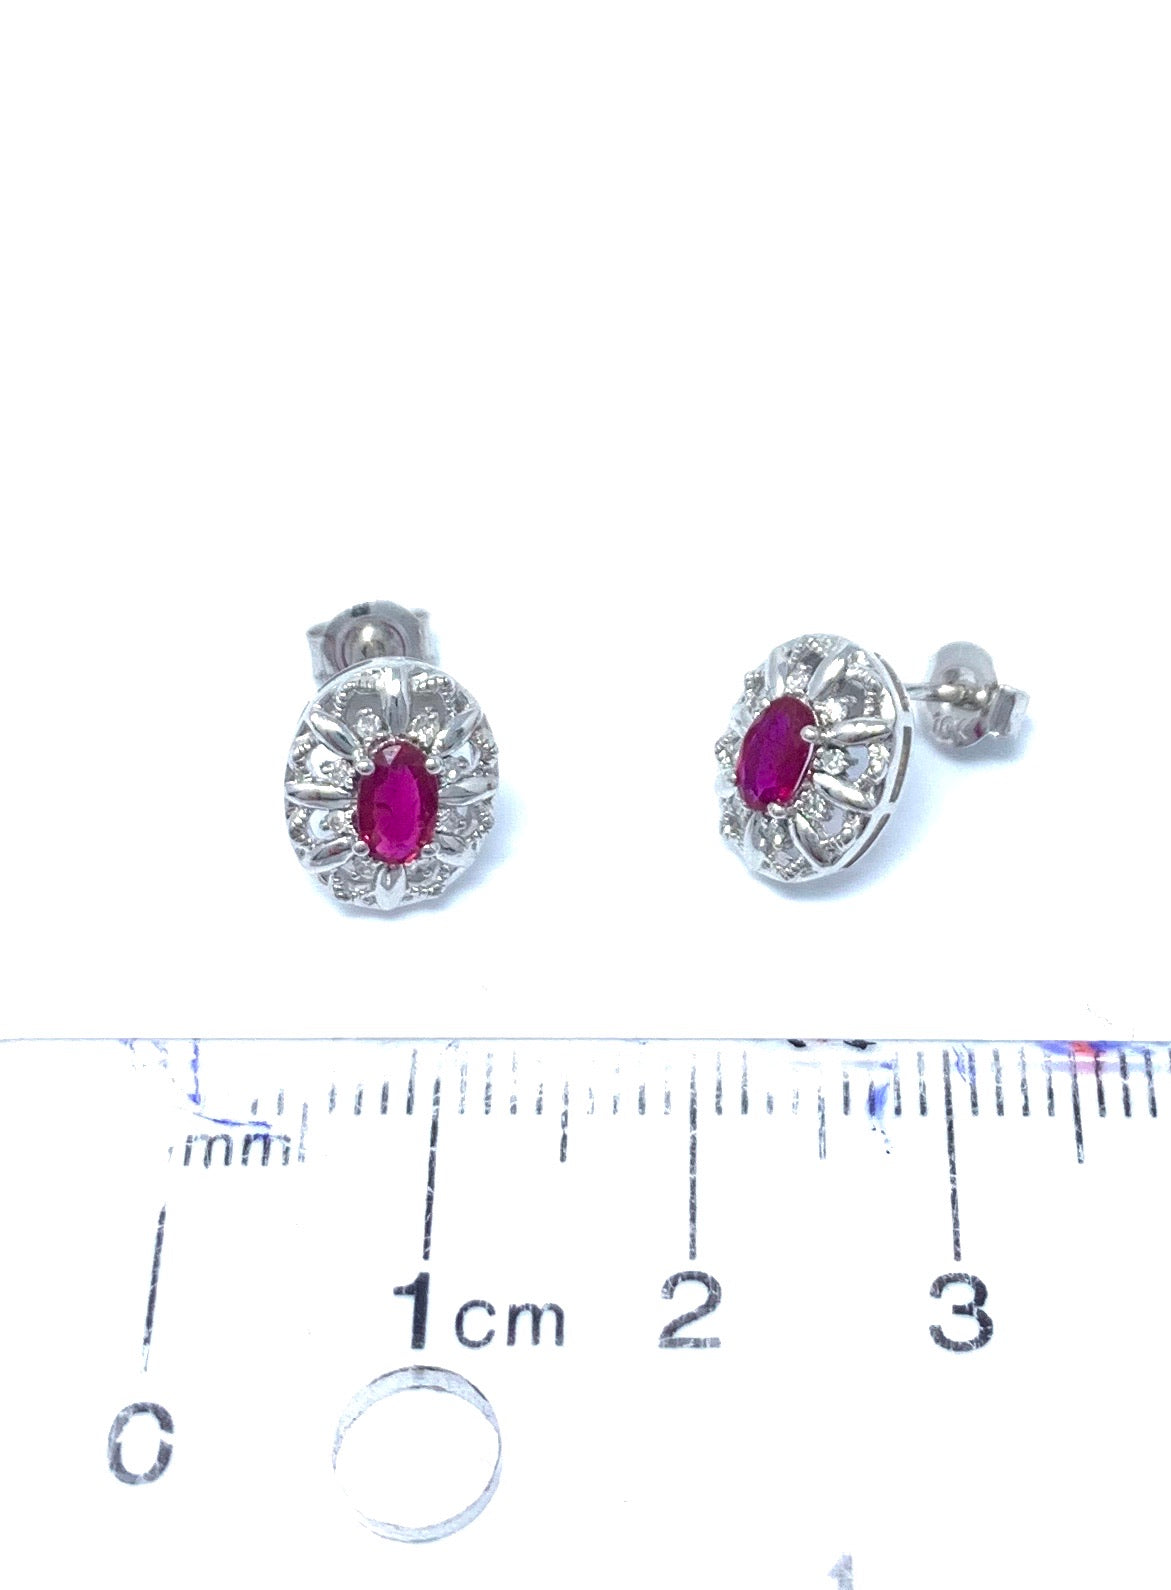 10K White Gold 0.65cttw Genuine Ruby and 0.08cttw Diamond Earrings